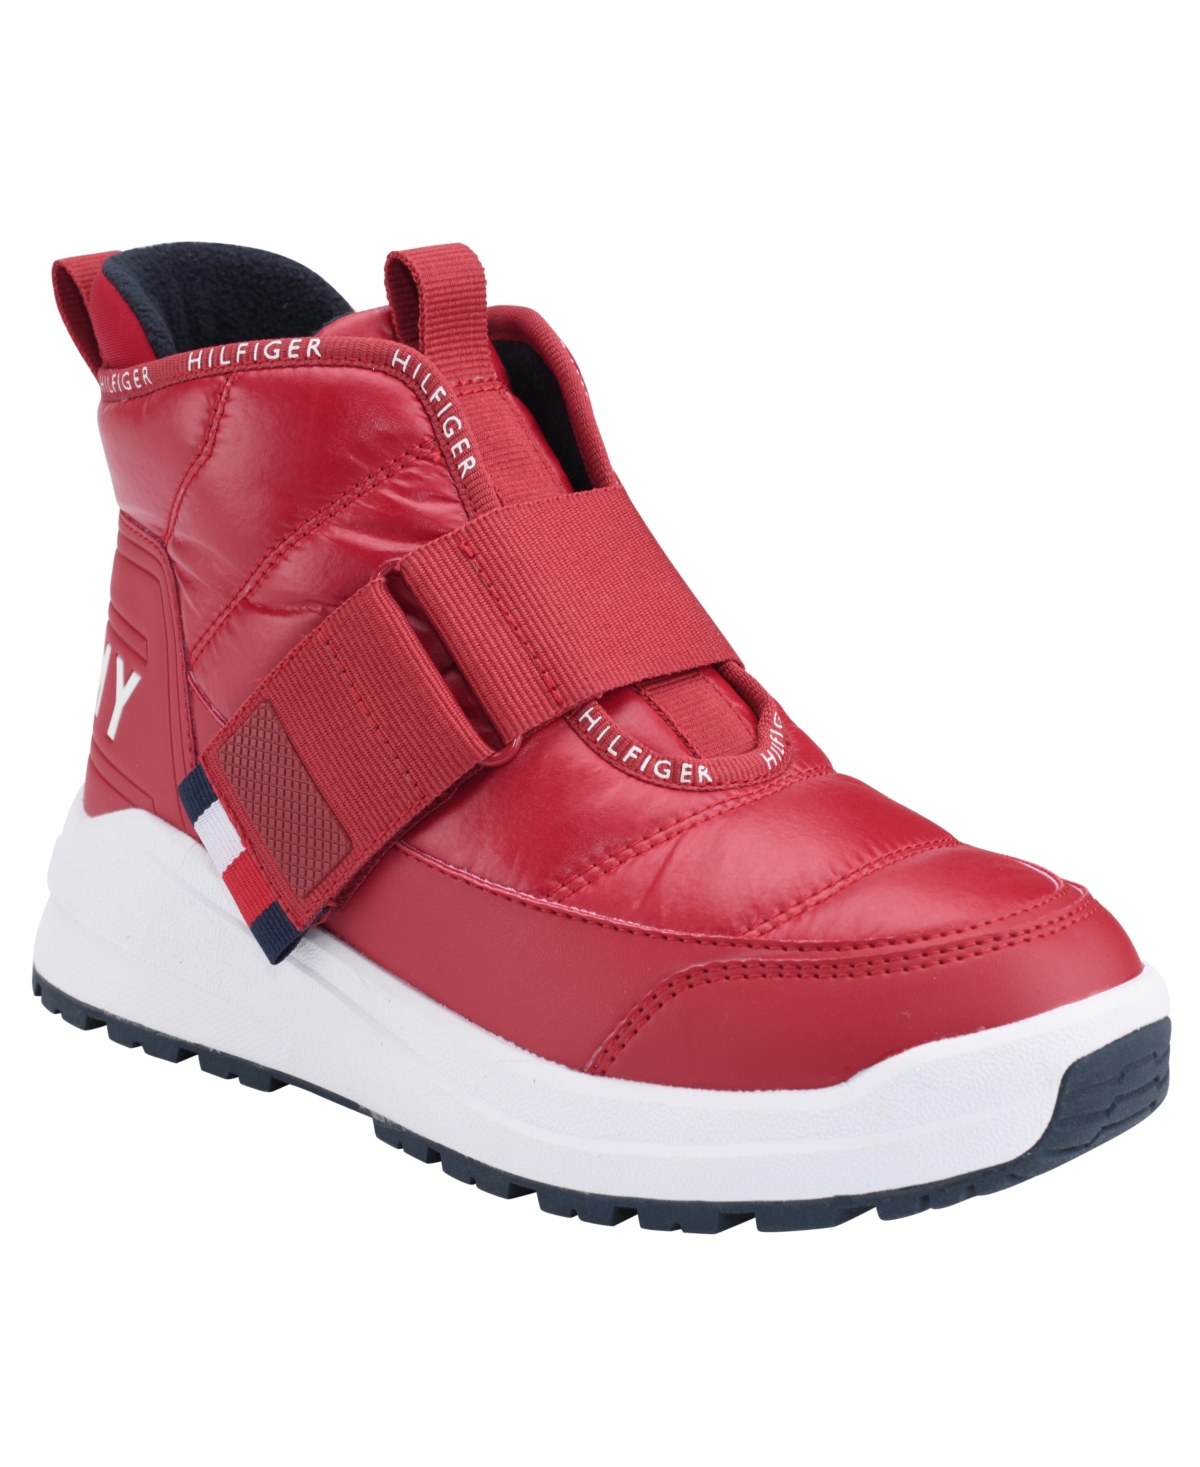 Tommy Hilfiger Olly Red Hook and Loop Rounded Toe Cozy Fashion Sneakers  (Red, 6)